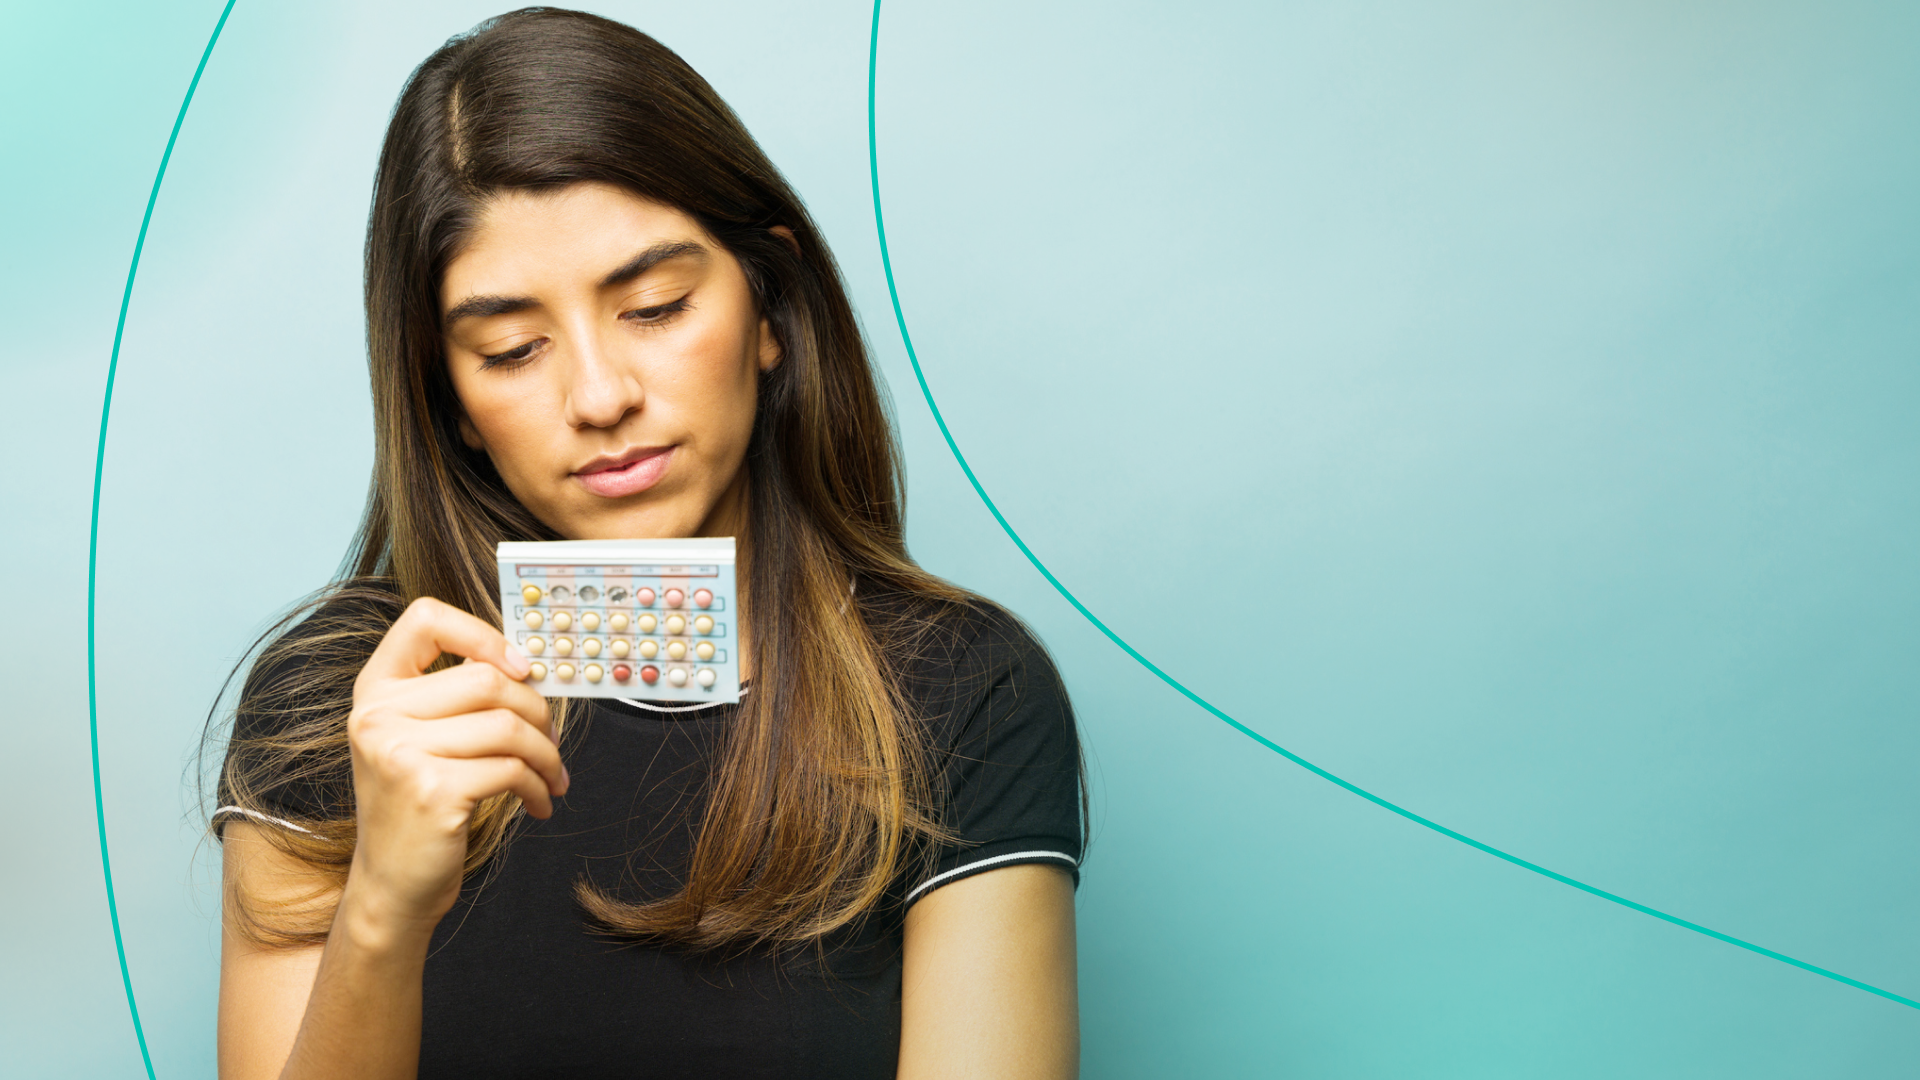 Why Are So Many Women Stopping Birth Control?